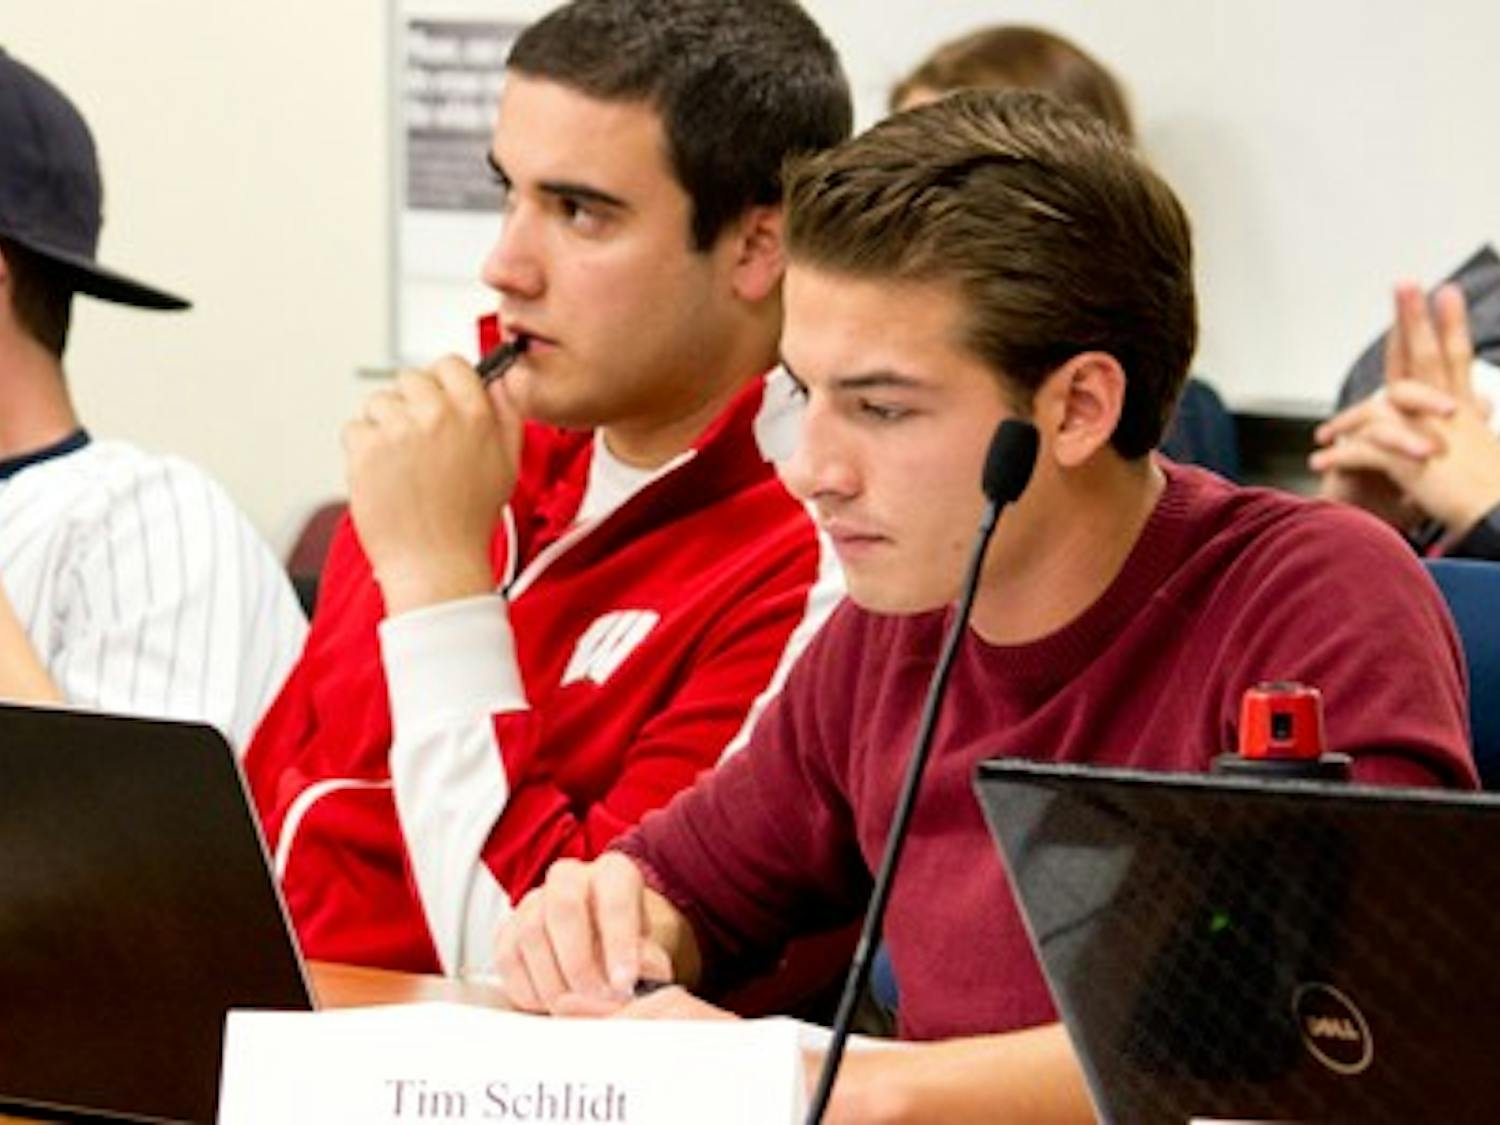 Student Services Finance Committee meets to discuss organizations' eligibility